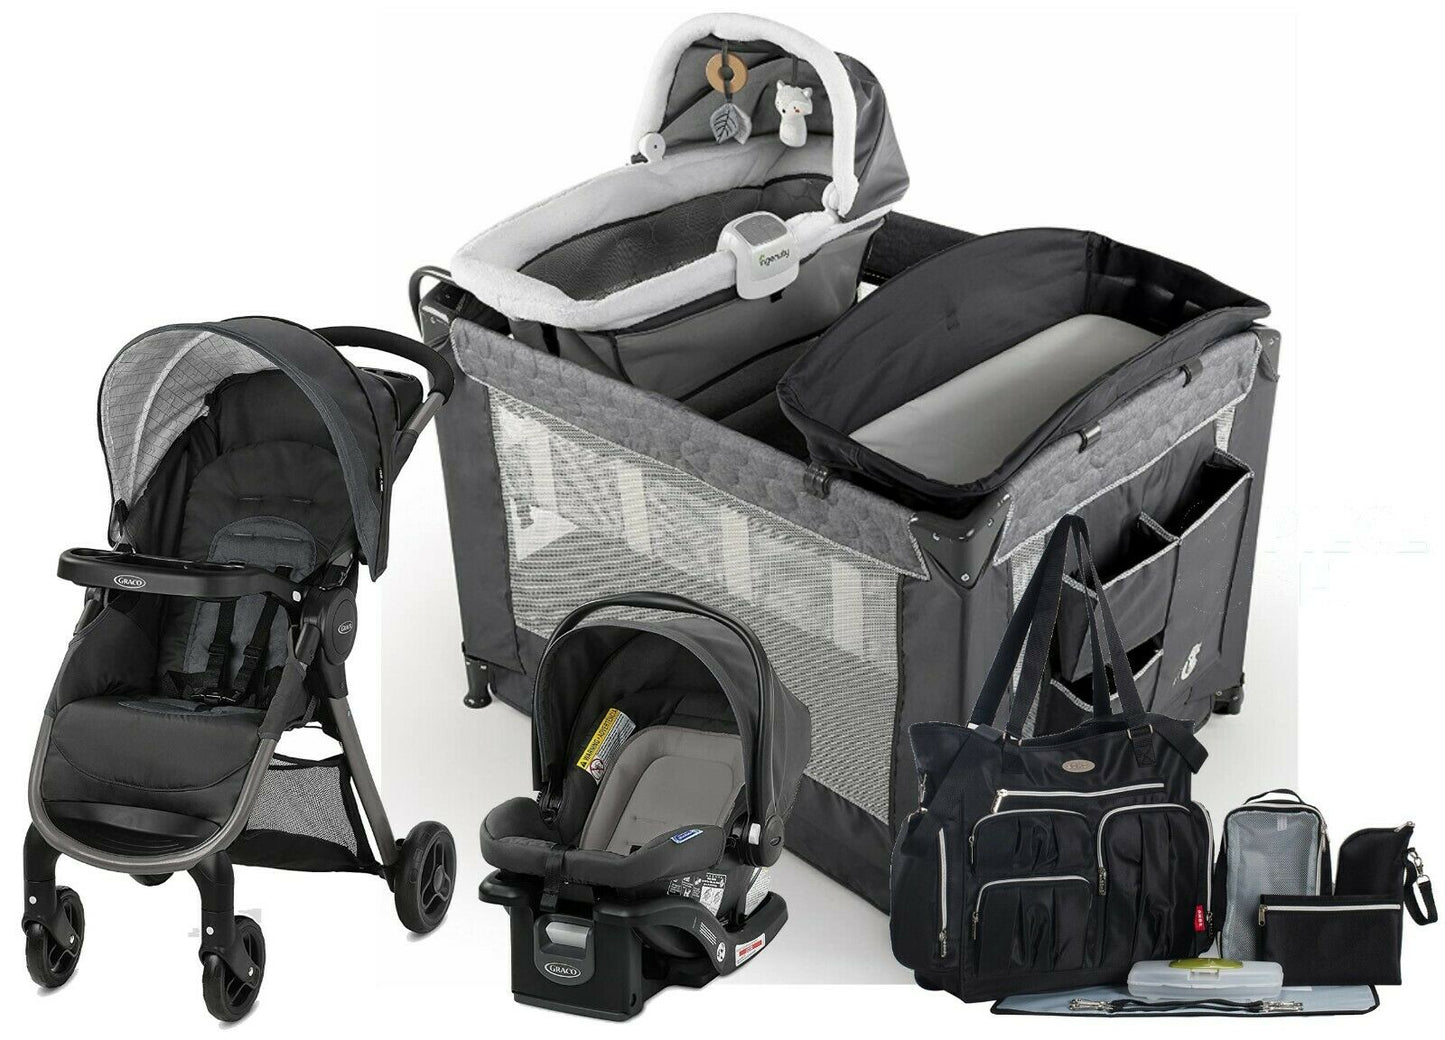 Graco Baby Stroller Travel System with Infant Car Seat Playard Bag Newborn Combo